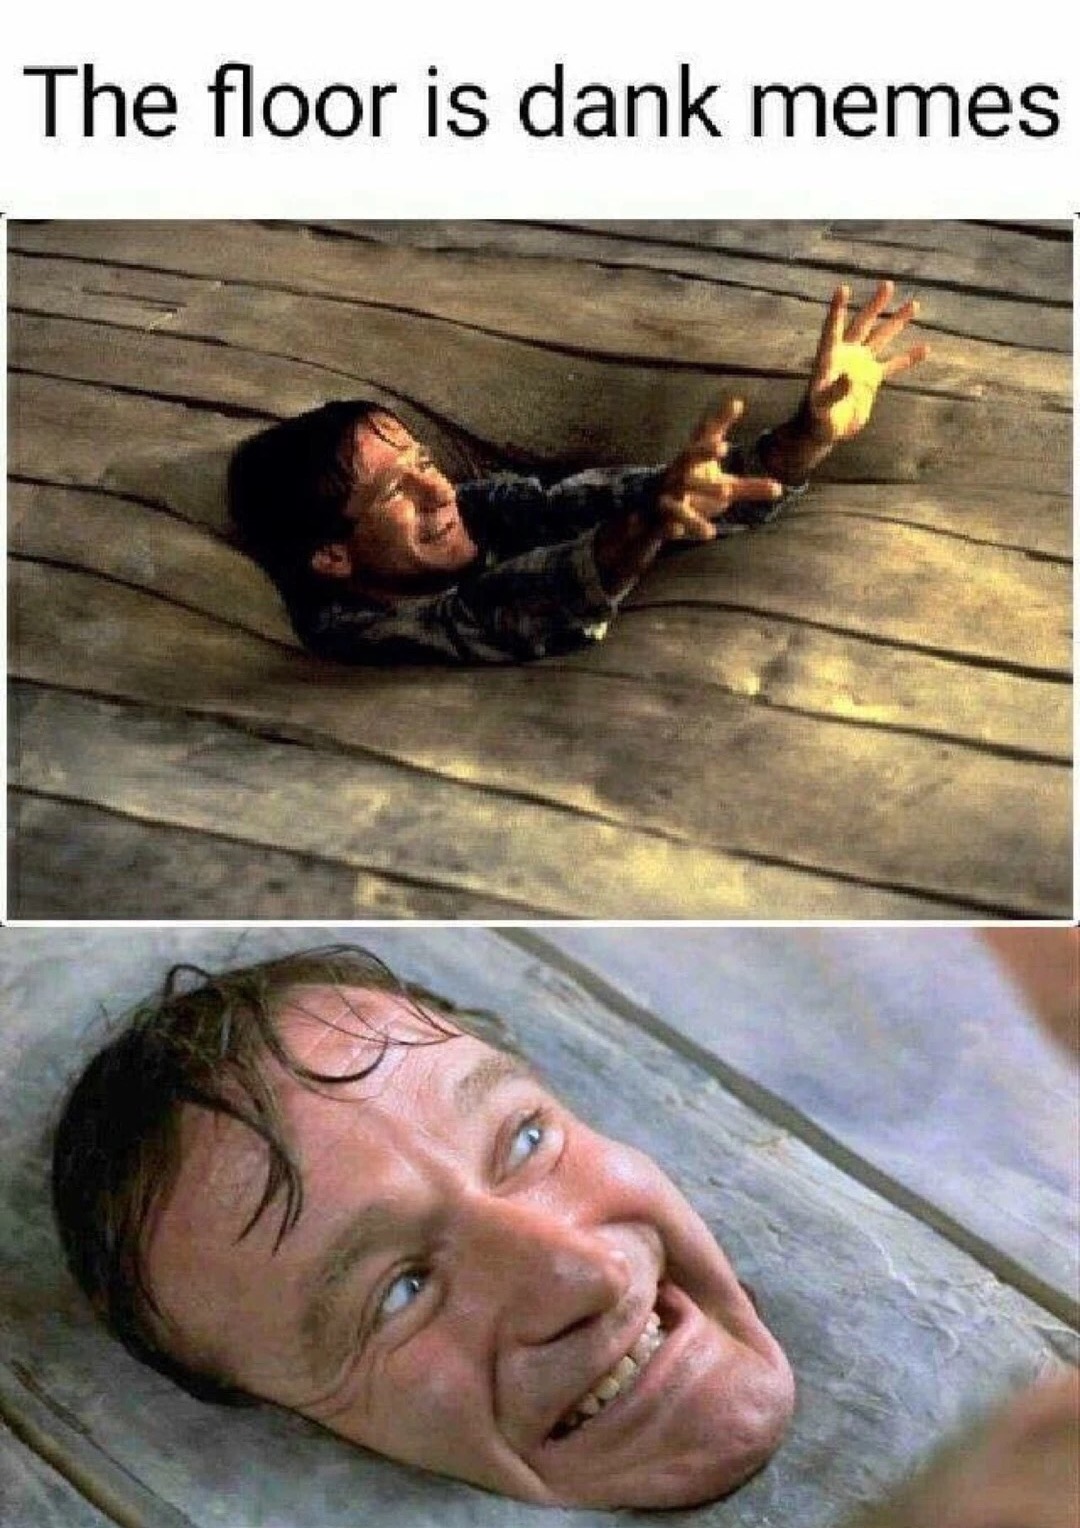 The Floor is Dank Memes with Robin Williams at first fighting being sucked into the floor, but then enjoying it.